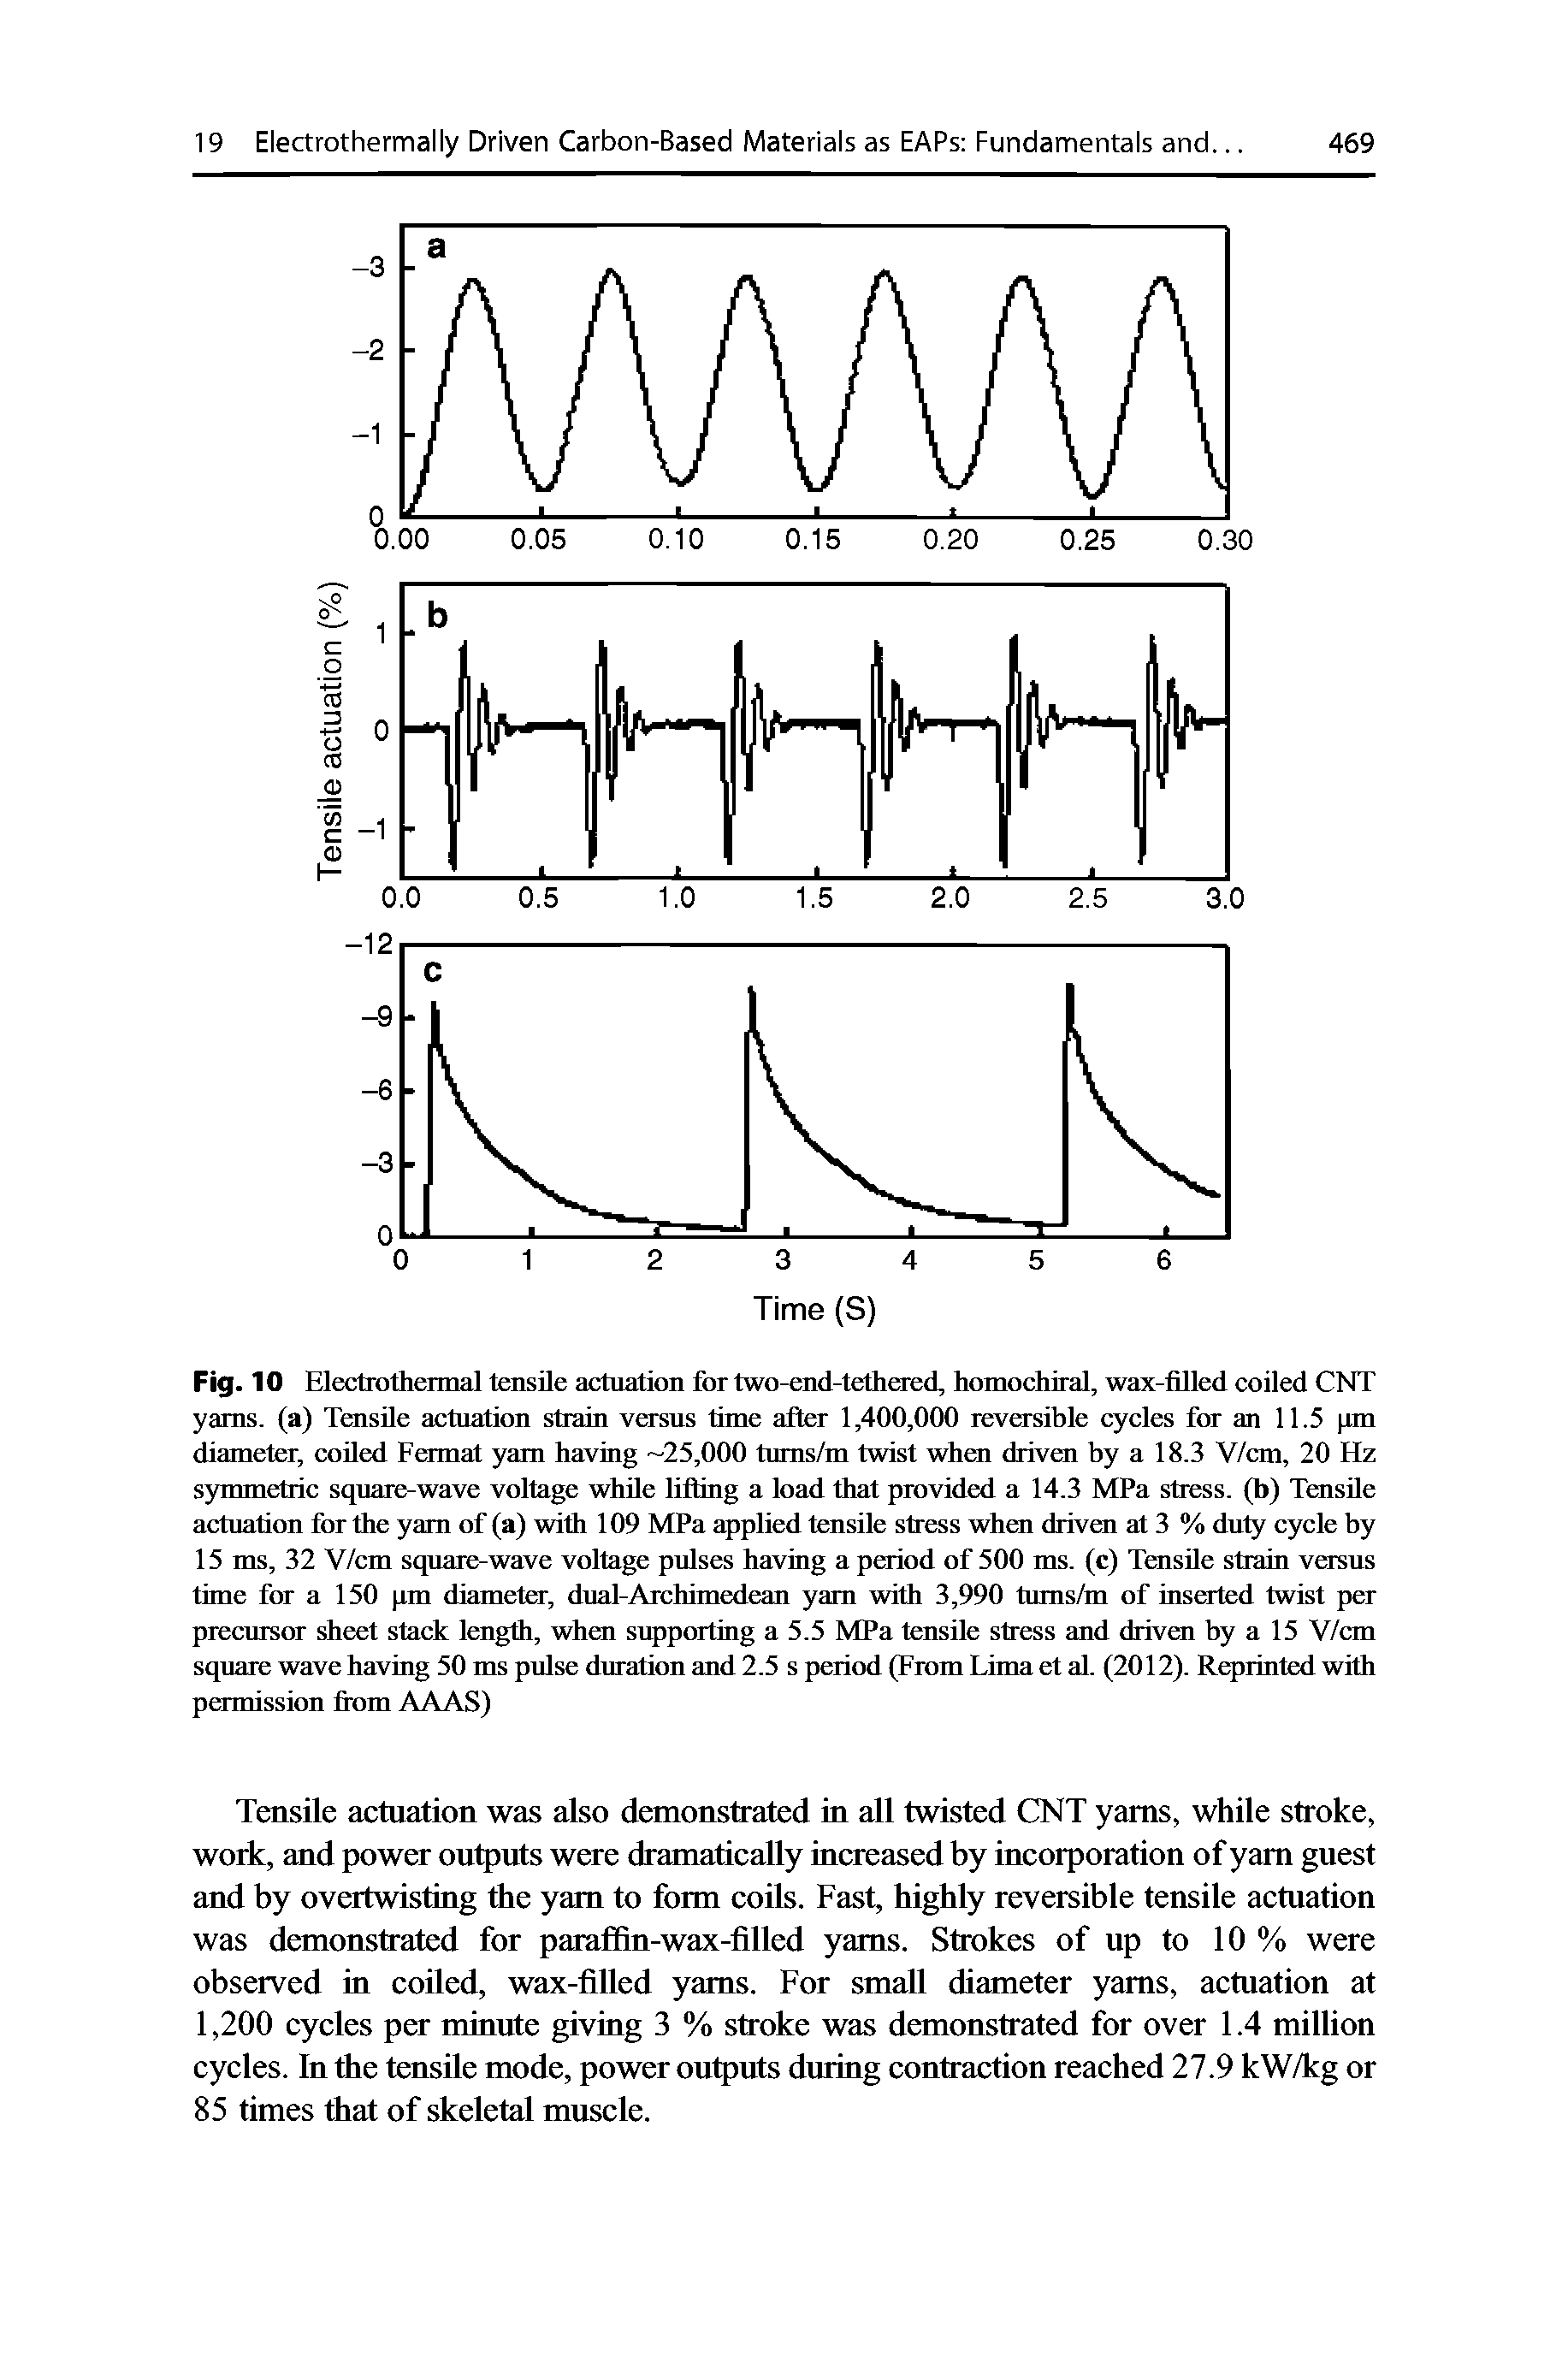 Fig. 10 Electrothermal tensile actuation for two-end-tethered, homochiral, wax-filled coiled CNT yams, (a) Tensile actuation strain versus time after 1,400,000 reversible cycles for an 11.5 (rai diameter, coiled Fermat yam having -25,000 tums/m twist when driven by a 18.3 V/cm, 20 Hz symmetric square-wave voltage while lifting a load that provided a 14.3 MPa stress, (b) Tensile actuation for the yam of (a) with 109 MPa pUed tensile stress when driven at 3 % duty cycle by 15 ms, 32 V/cm square-wave voltage pulses having a period of 500 ms. (c) Tensile strain versus time for a 150 pm diameter, diial-Aichimedean yam with 3,990 tums/m of inserted twist per preciusor sheet stack length, when supporting a 5.5 MPa tensile stress and driven by a 15 V/cm square wave having 50 ms pulse duration and 2.5 s period (From Lima et aL (2012). Reprinted with permission from AAAS)...